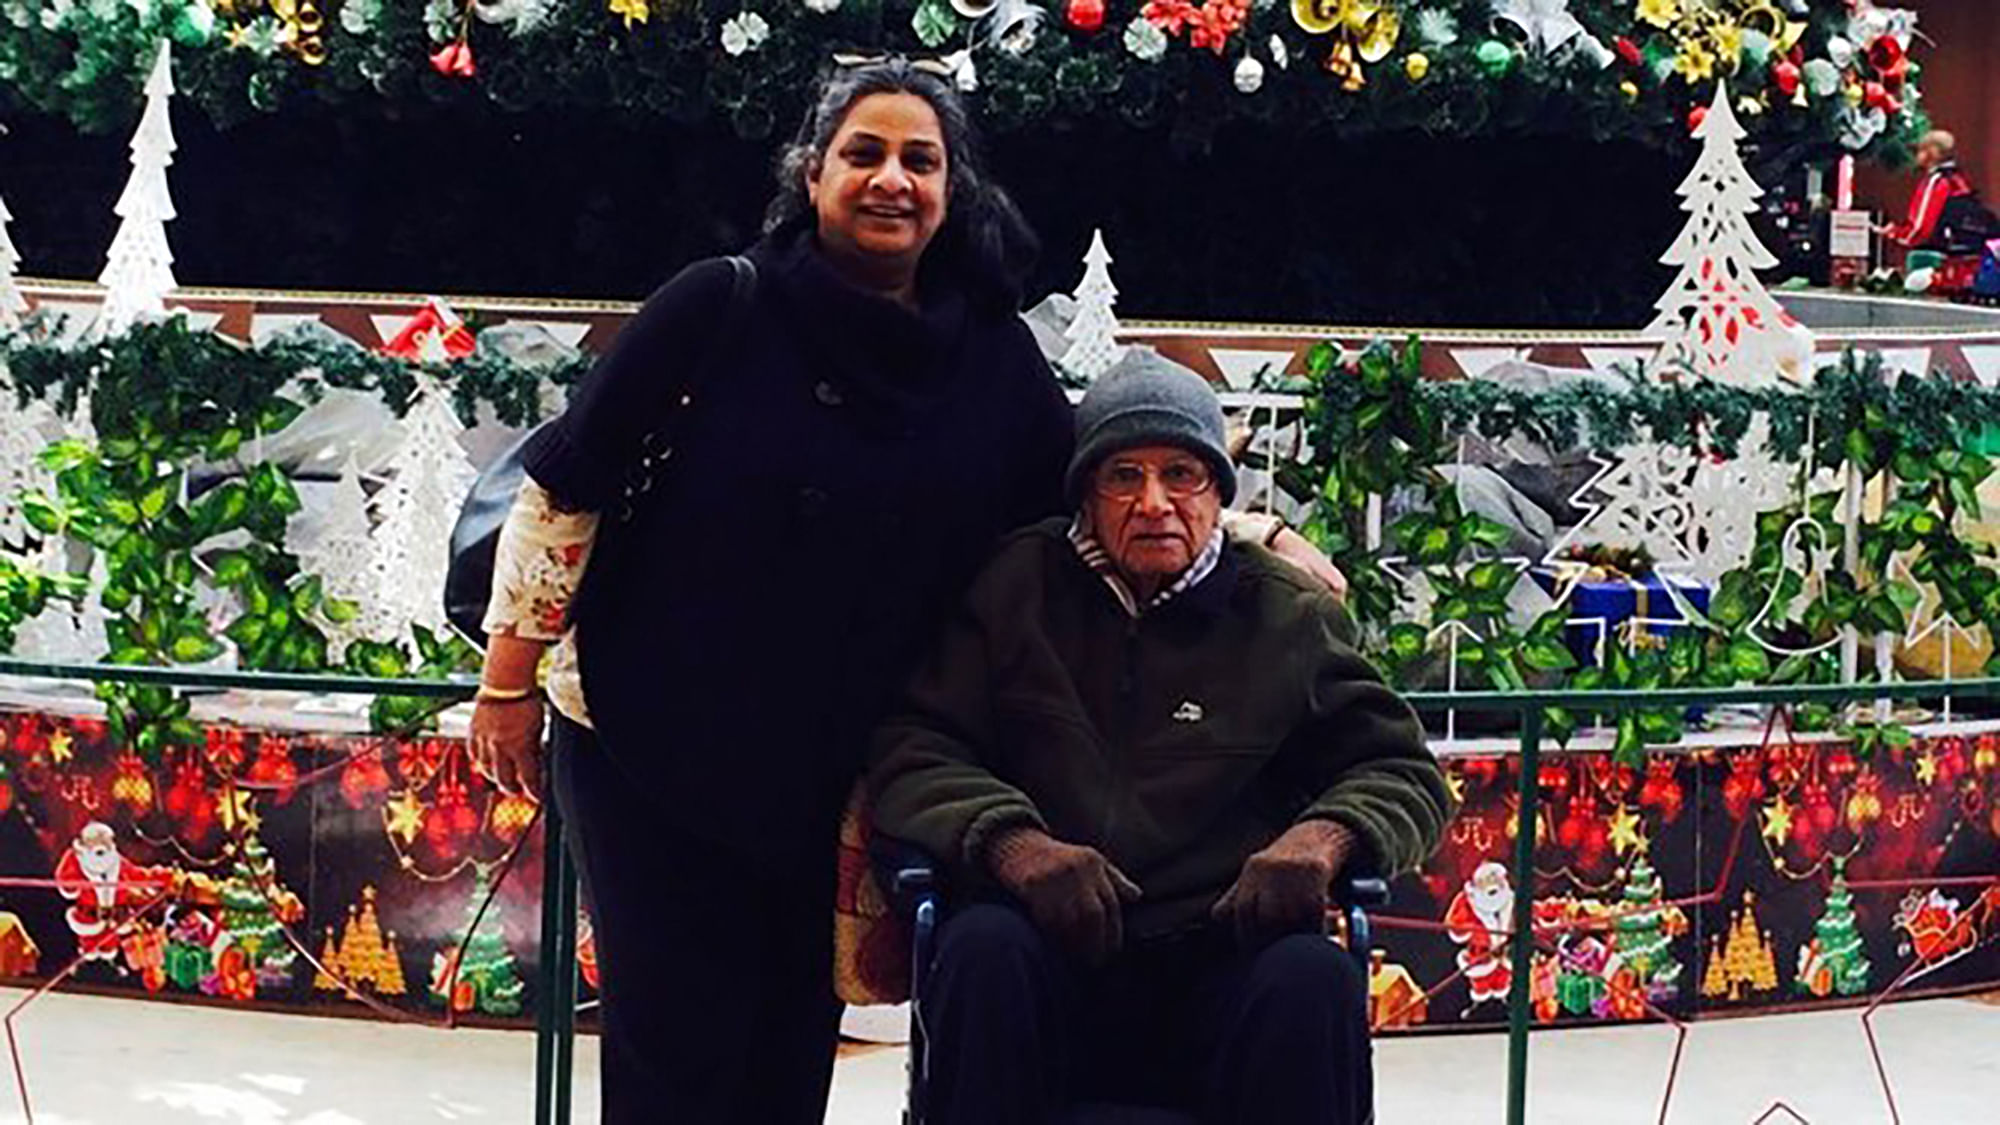 Sangeeta Murthi Sahgal at a city mall with her father who was diagnosed with Parkinson’s Disease in 2008. (Photo Courtesy: Sangeeta Murthi Sahgal). 